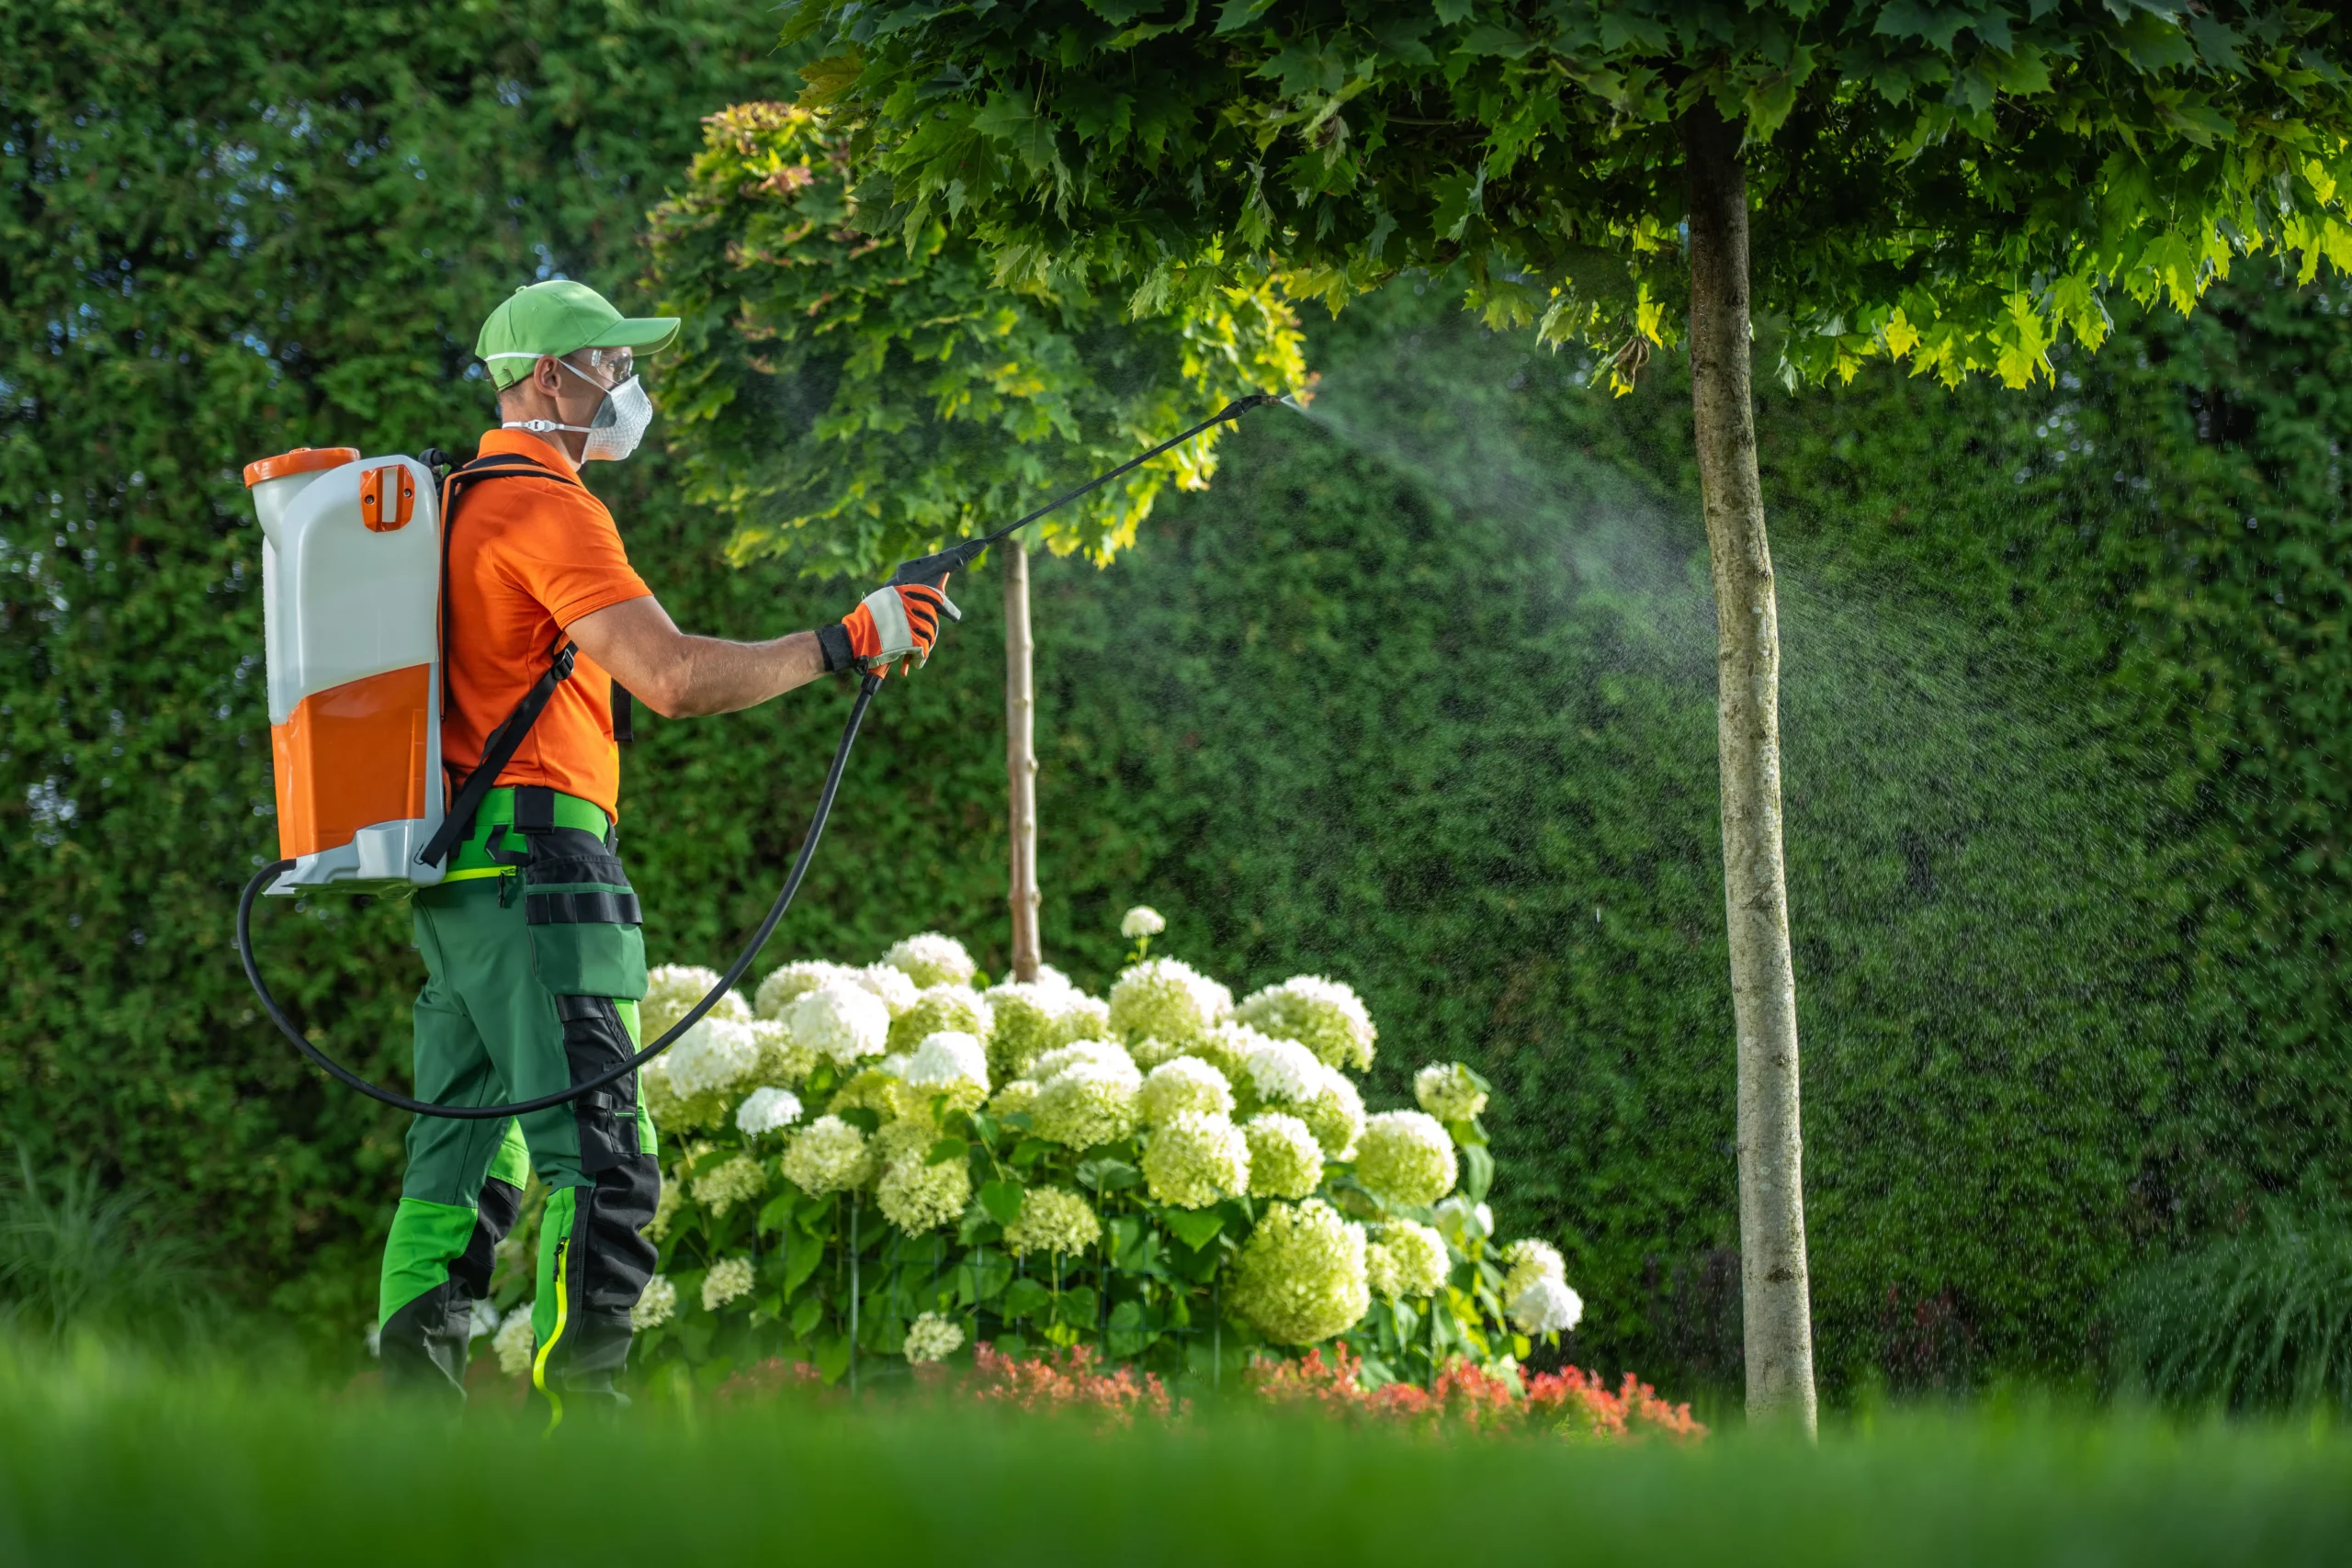 Worker spraying insecticide